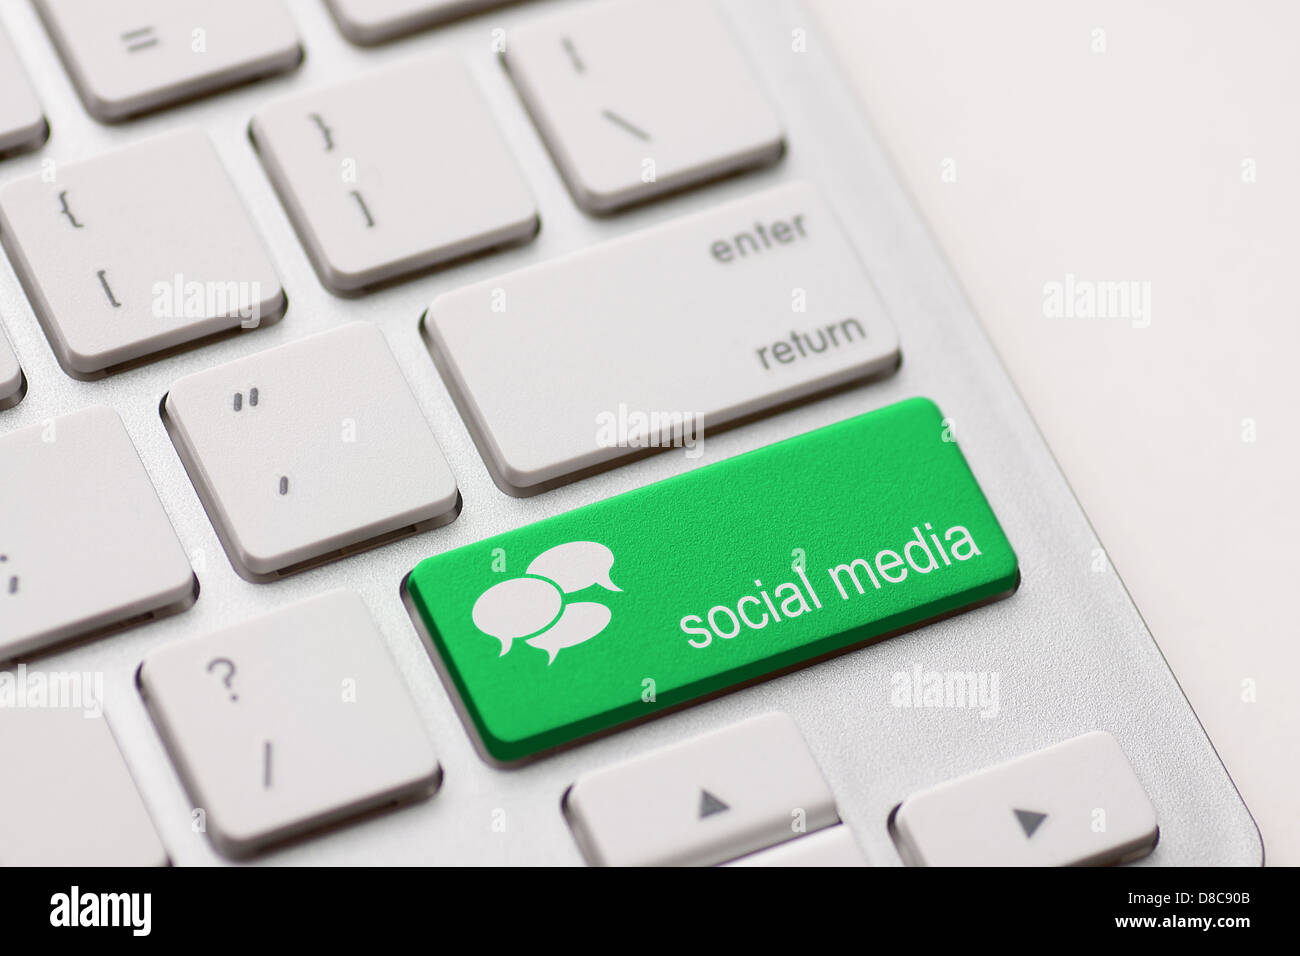 Social Media button on a keyboard with speech bubbles. Stock Photo